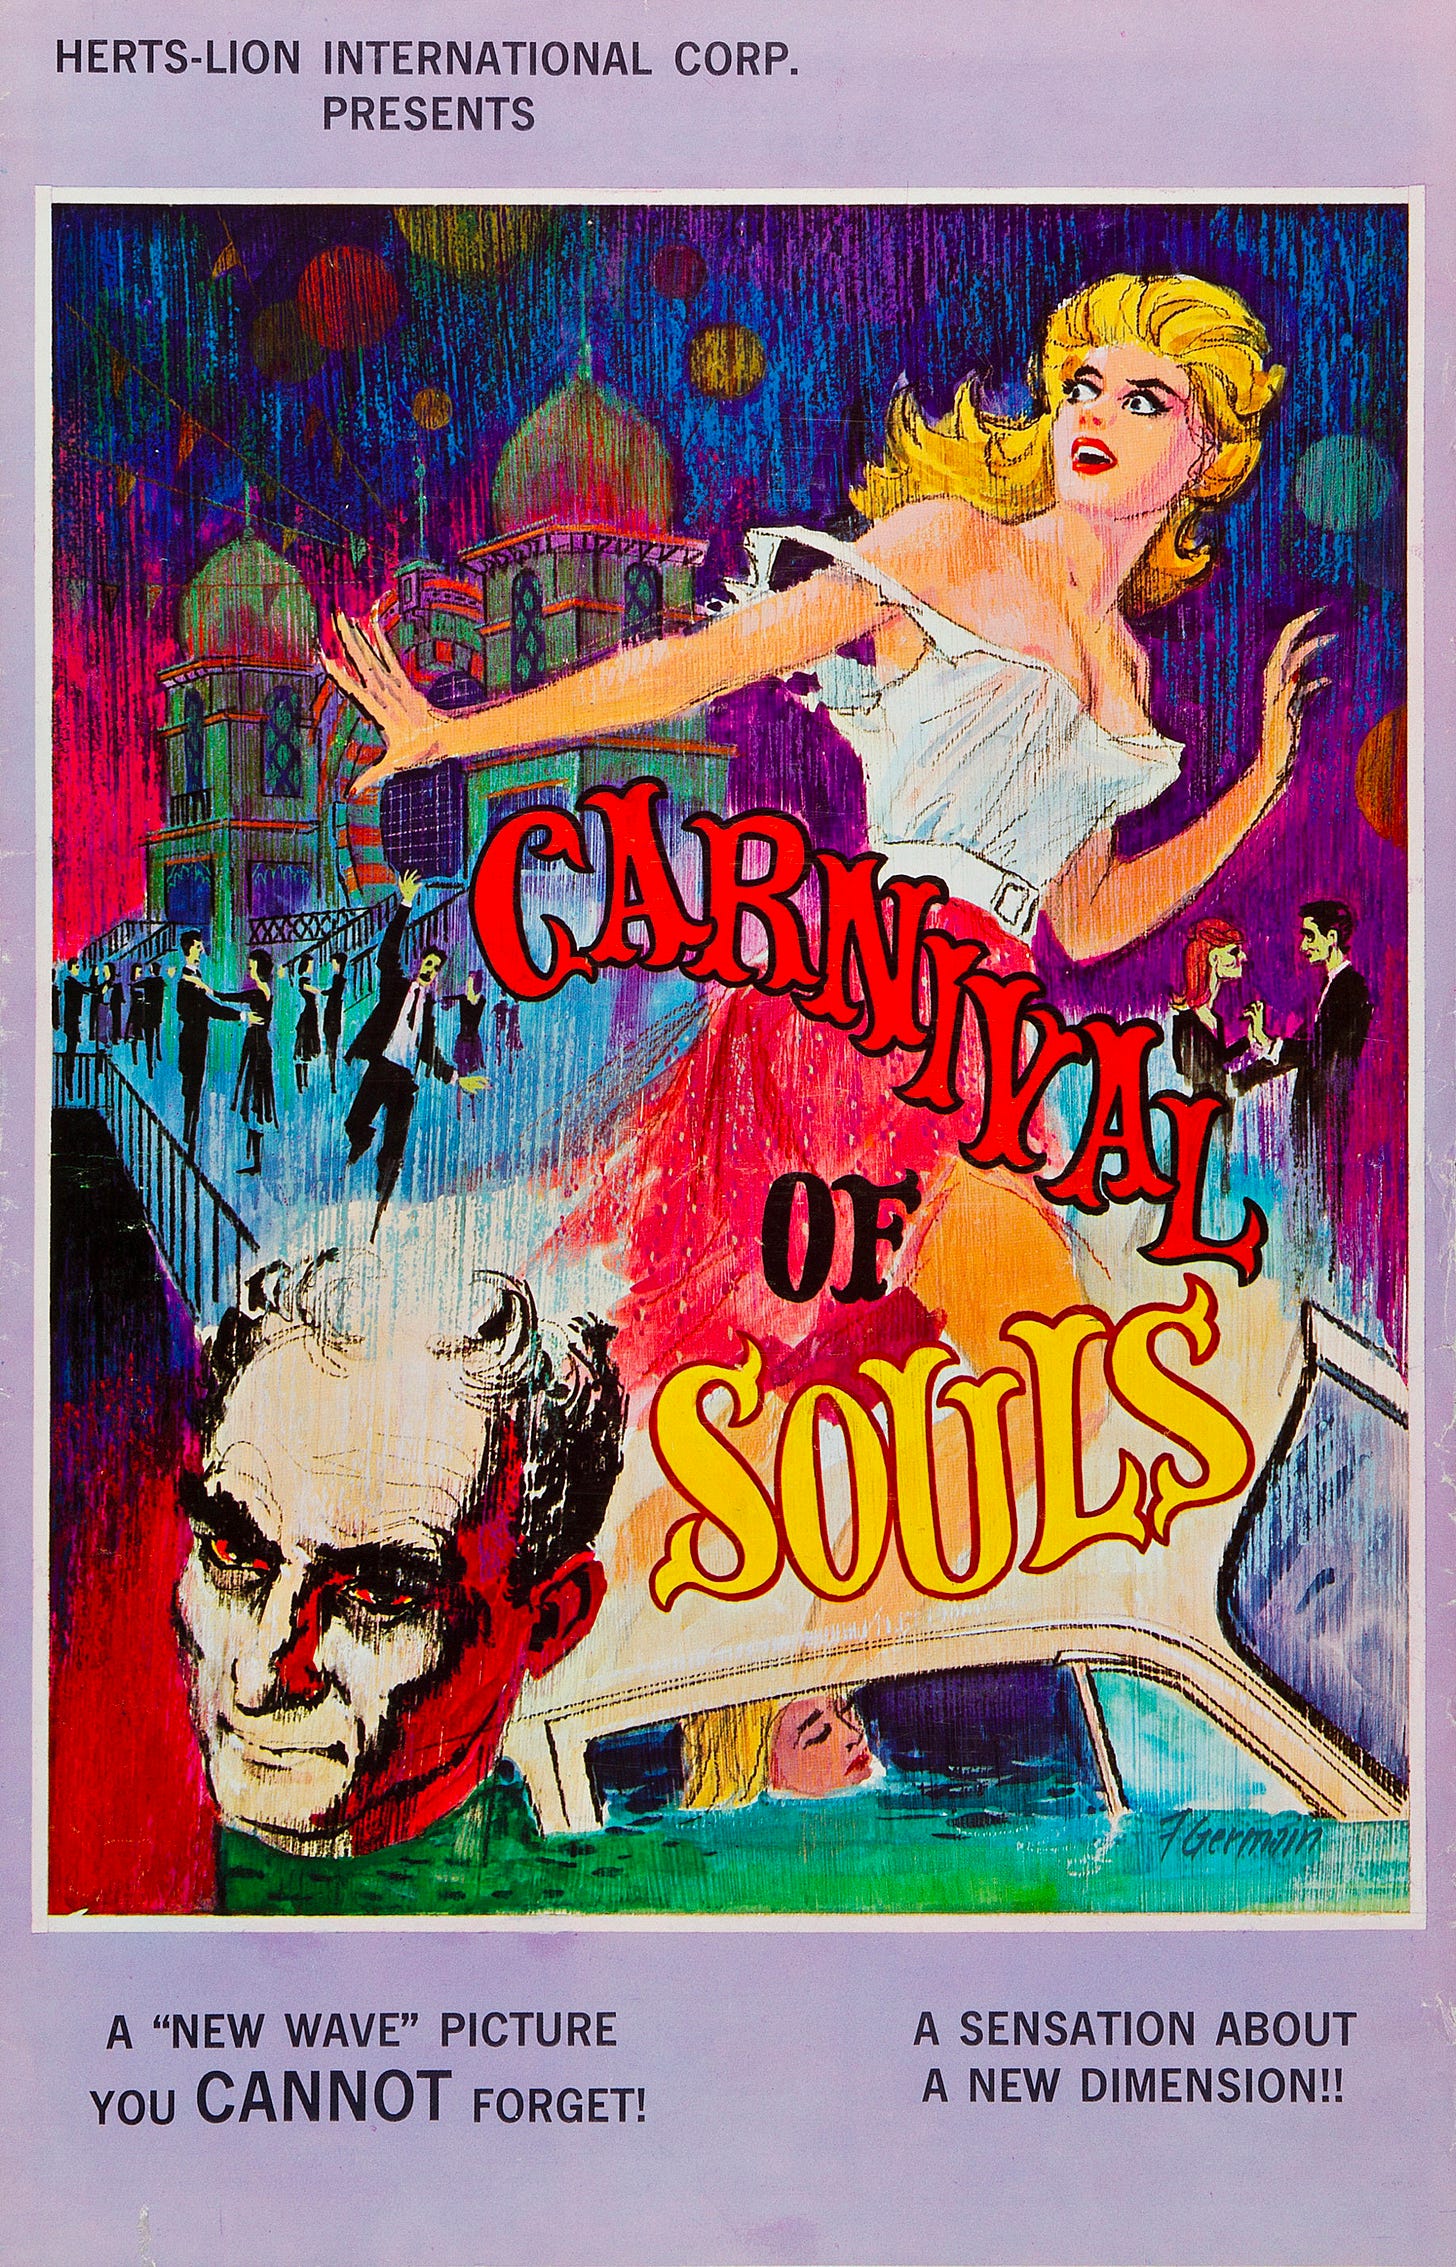 The film's original poster. An illustrated Mary Henry is at the top right, looking afraid. She is blonde with red lipstick and pale skin. ONn the bottom left is The Man, who has glowing red eyes and a grim face. Between them, carnival-style font in red and yellow reads "Carnival of Souls" and a car is shown with a woman dead in the passenger seat.